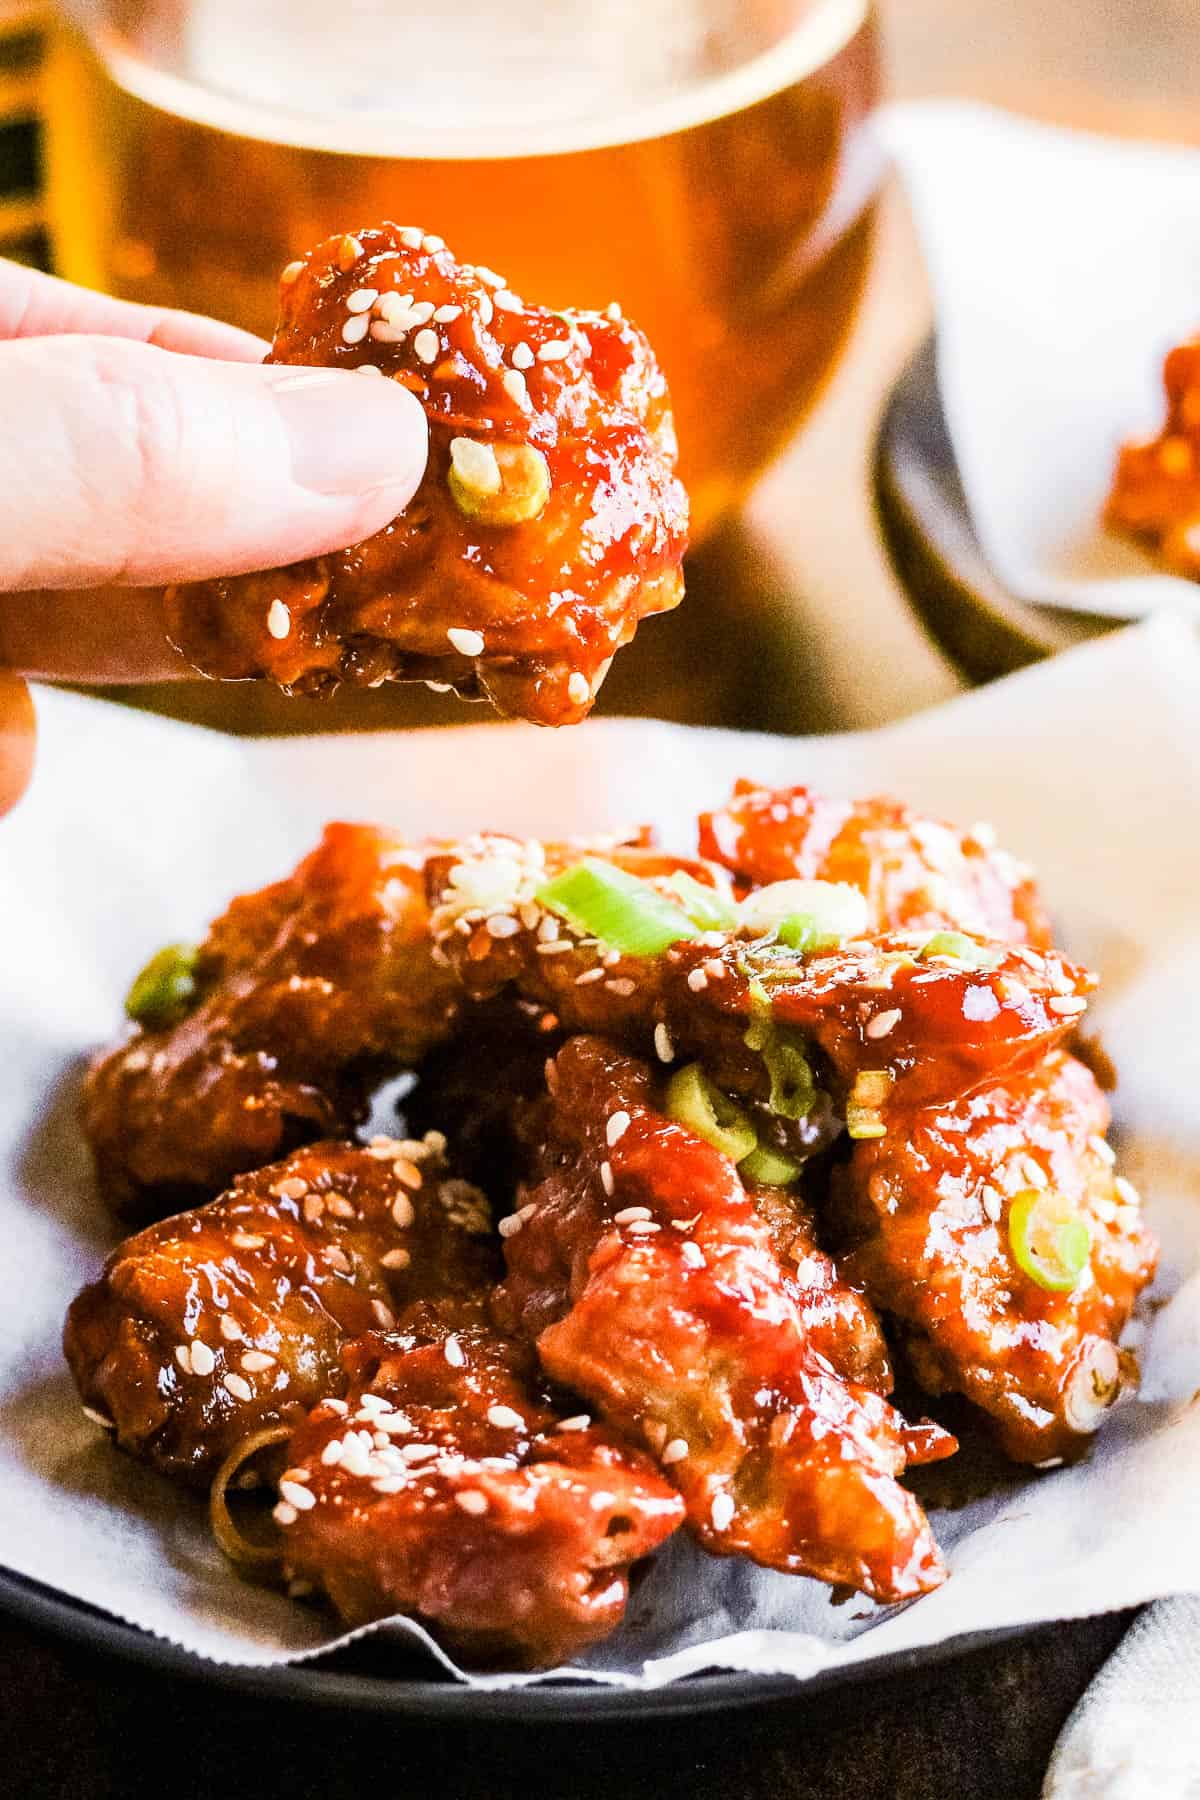 Korean fried chicken on a plate with a beer and someone holding a piece of the chicken in their fingers.